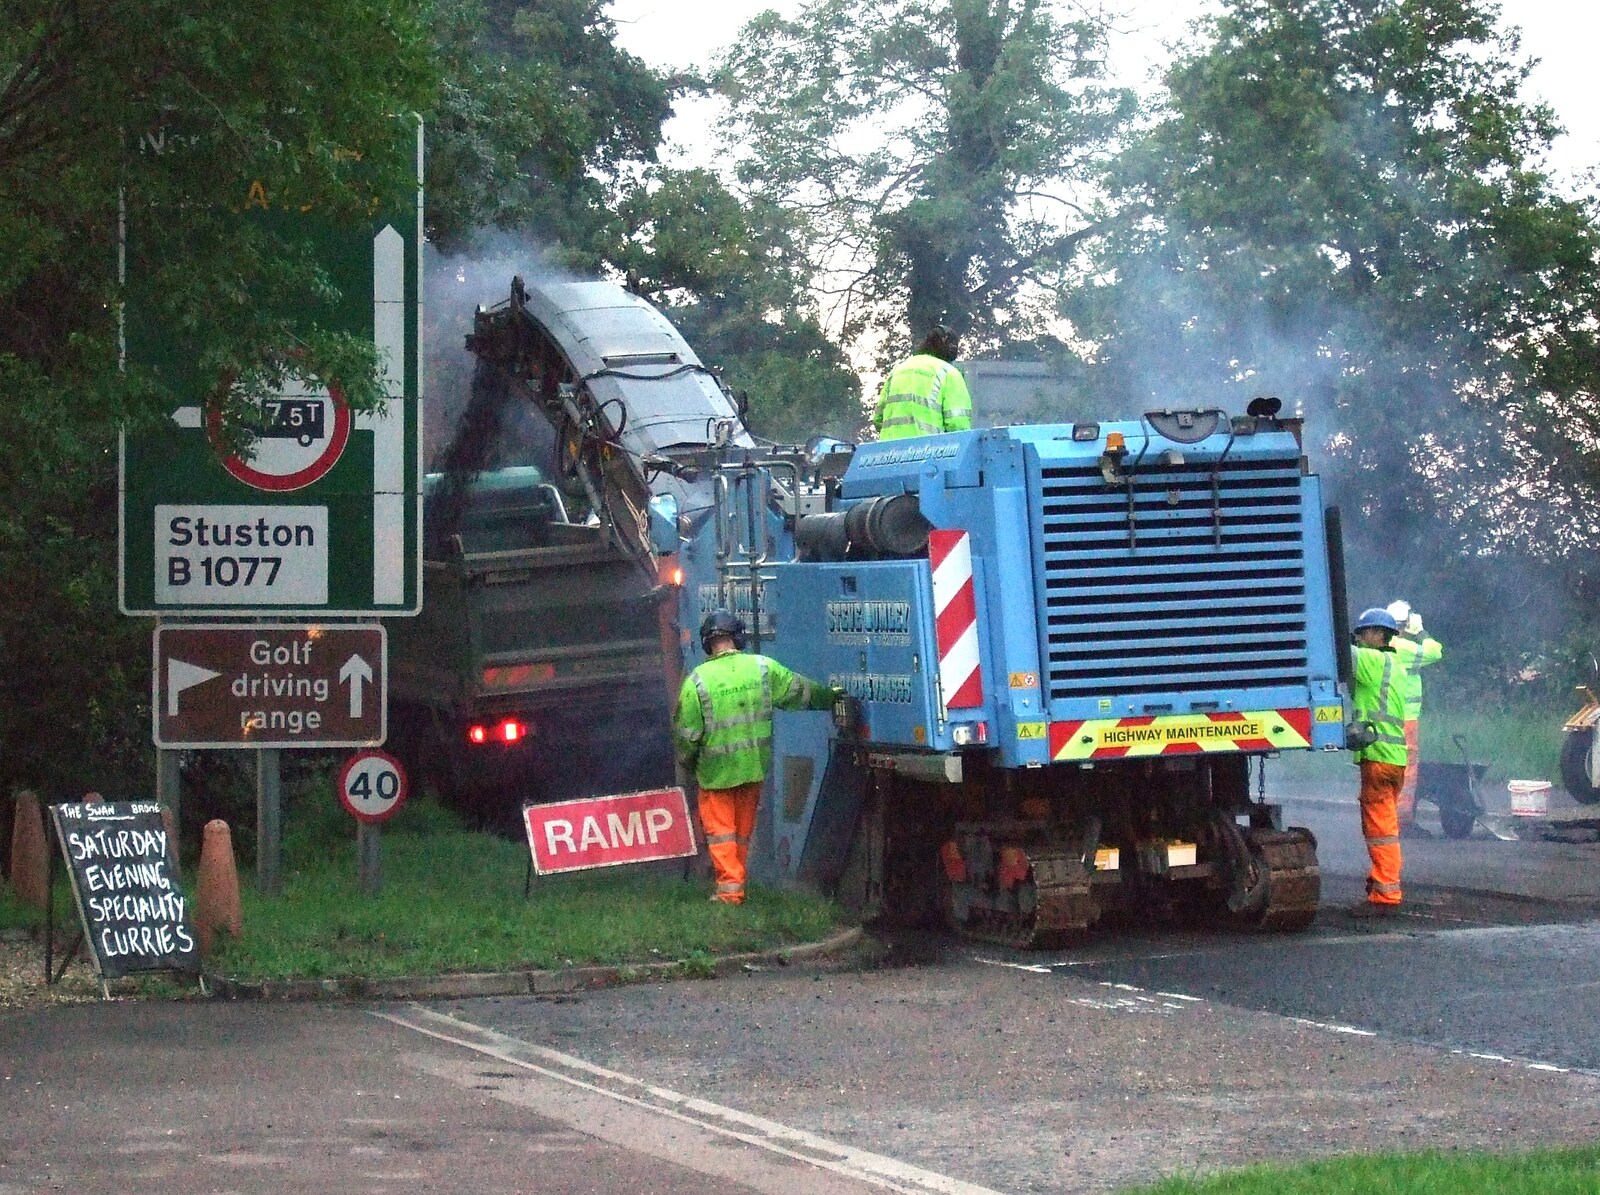 The tarmac-eating machine scoffs more road from Paella and Roadworks, Brome, Suffolk - 9th July 2011